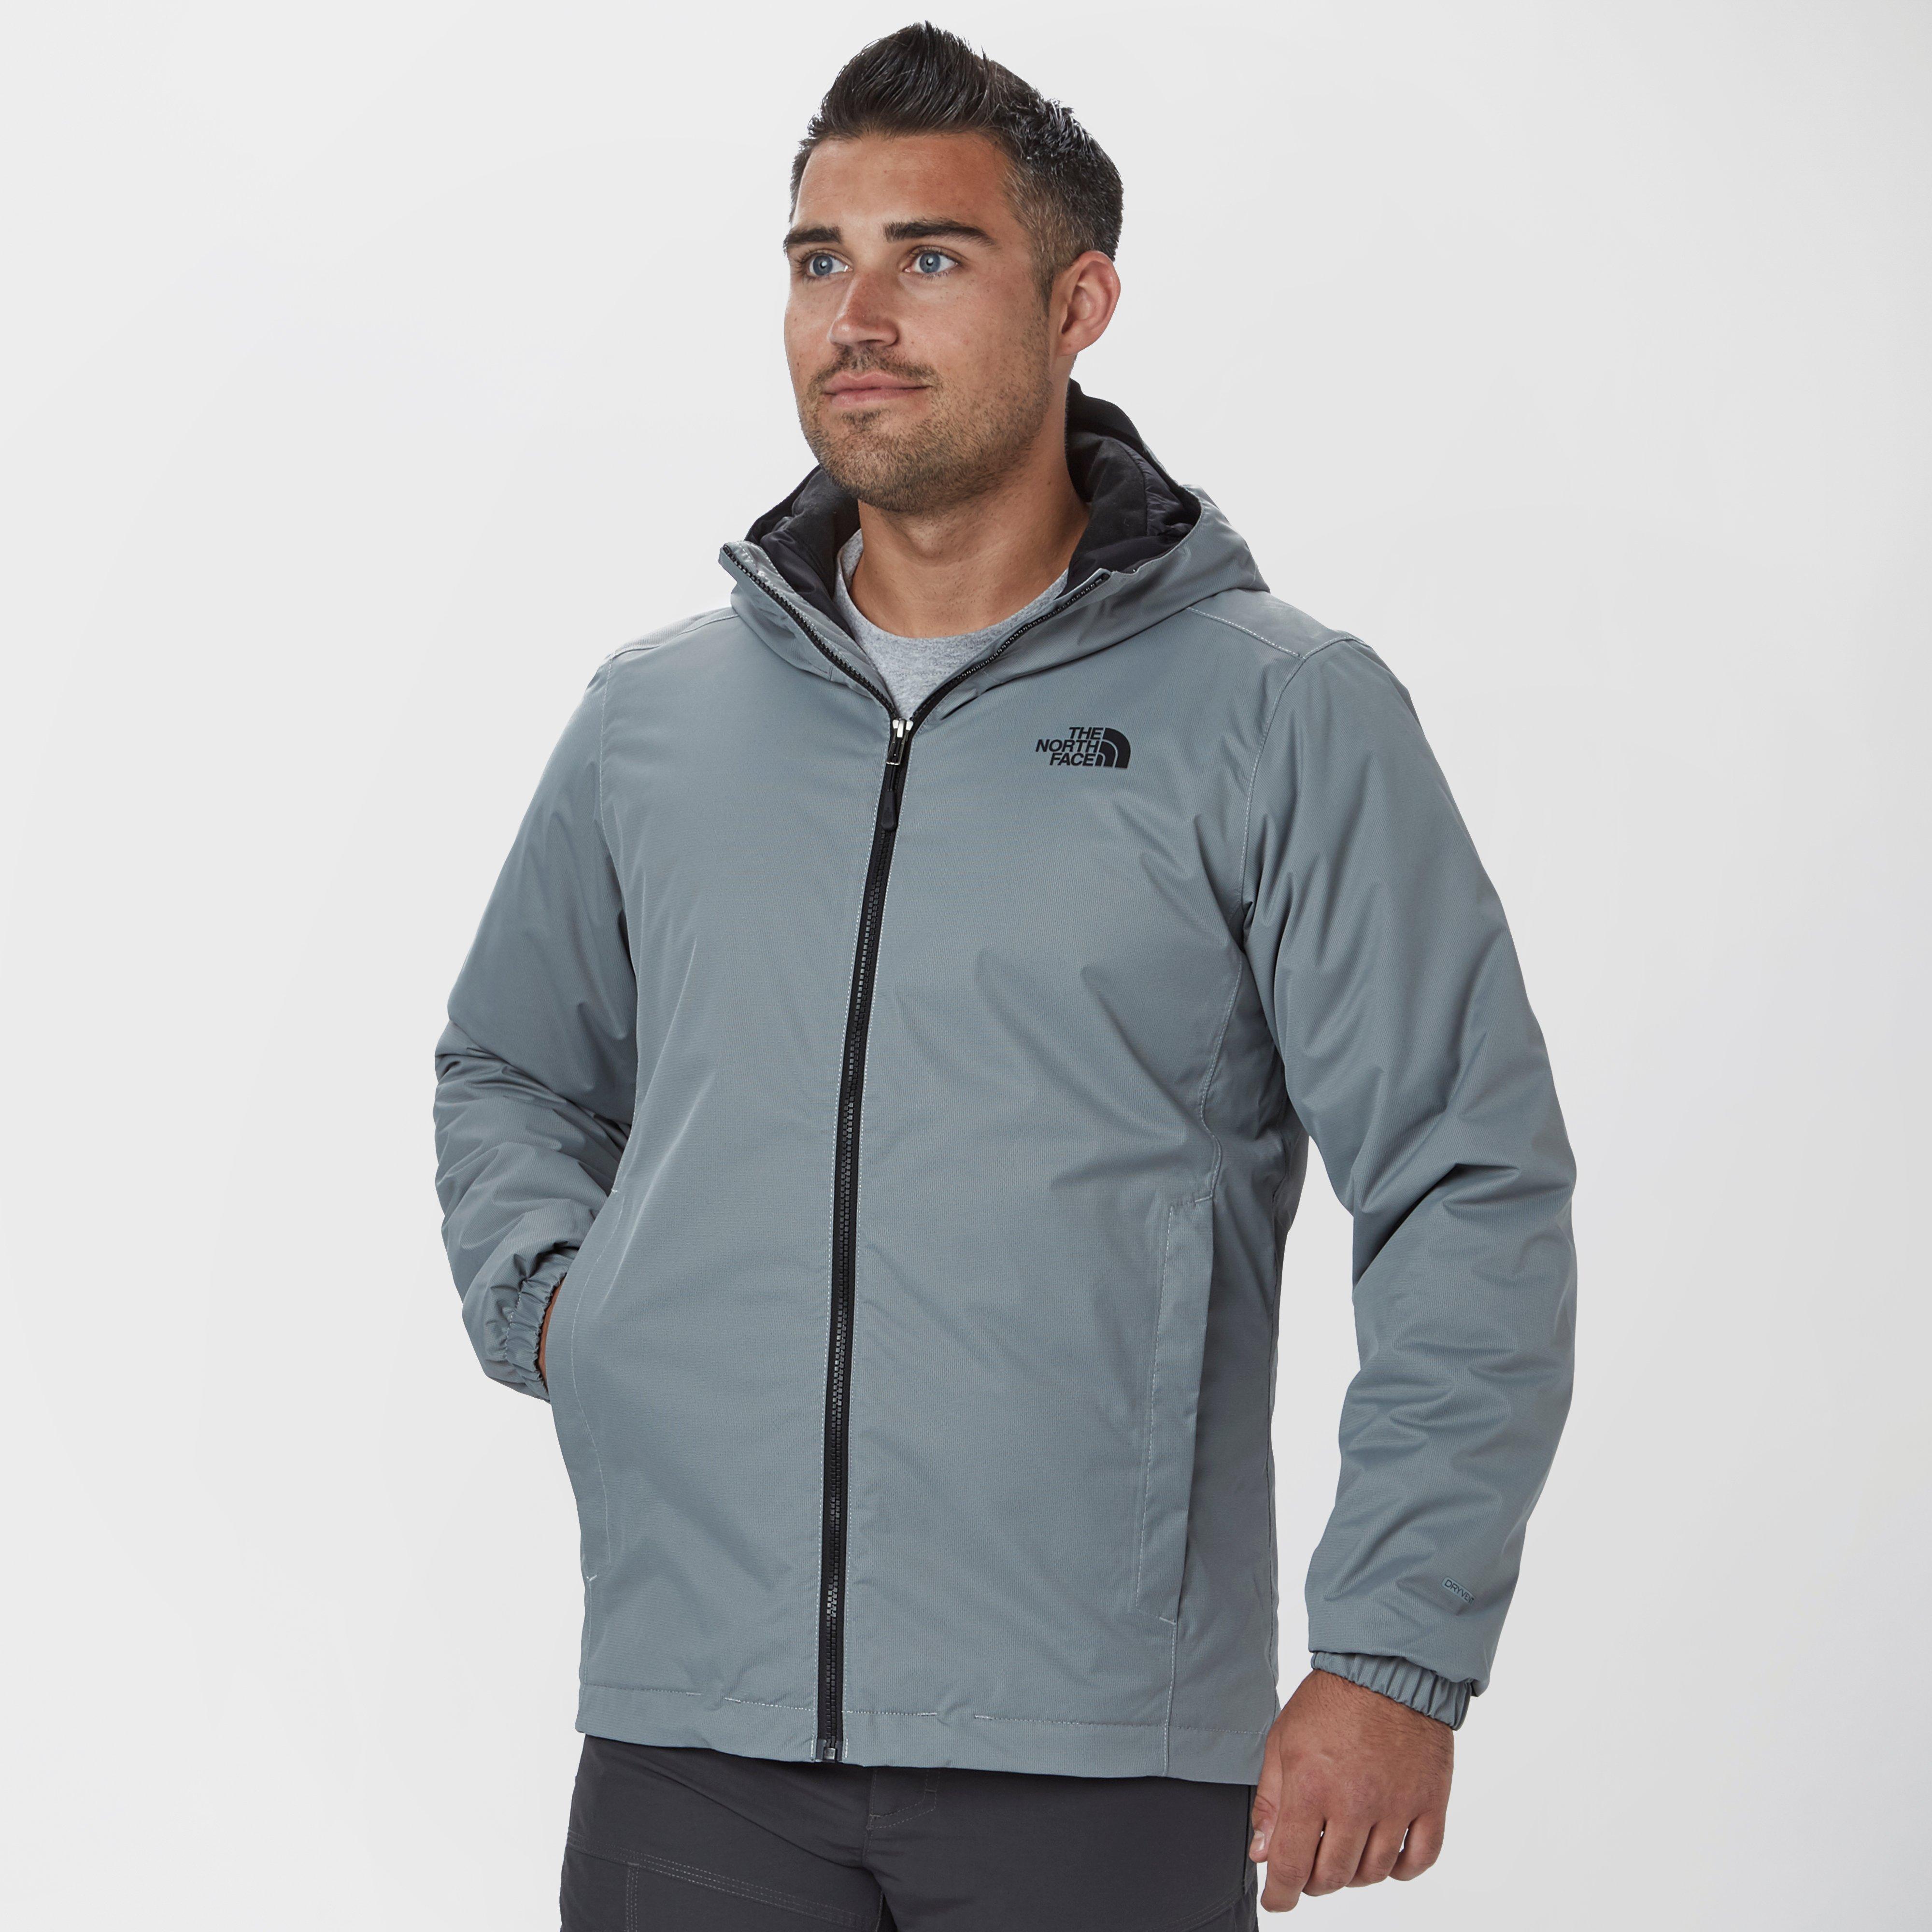 men's quest insulated jacket north face